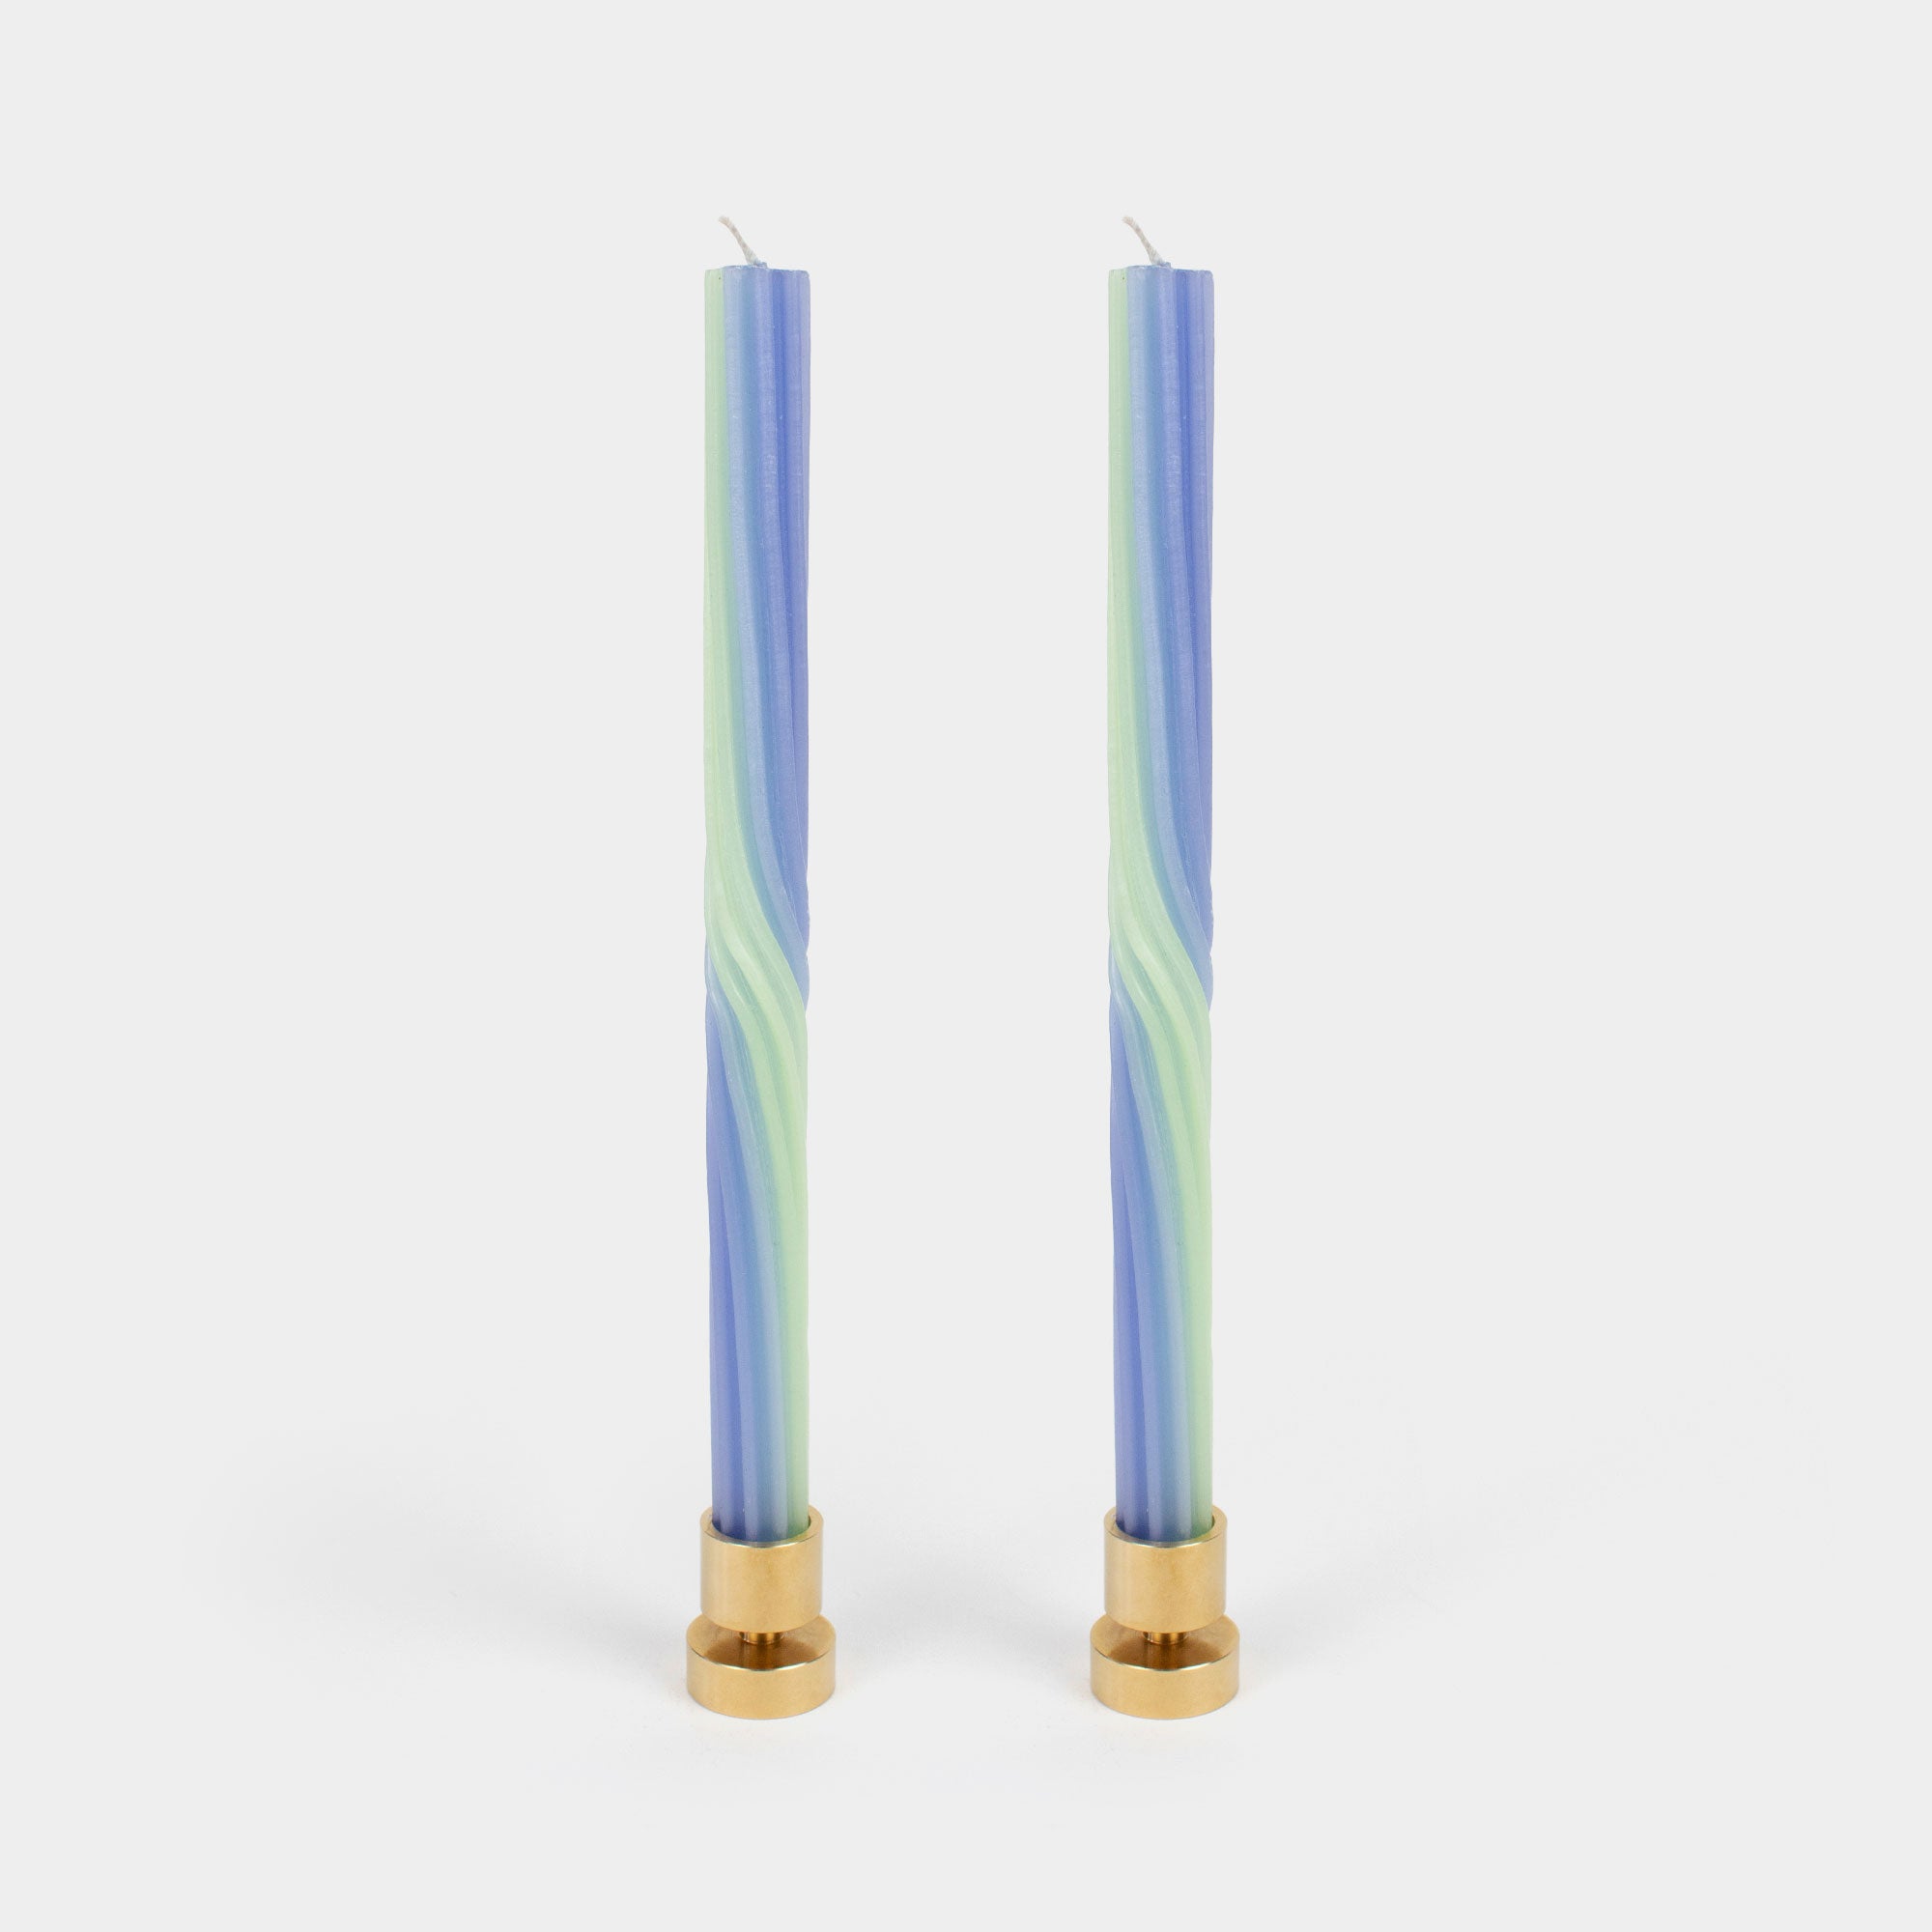 Pivot Candles - Lavender & Green (2 pack)